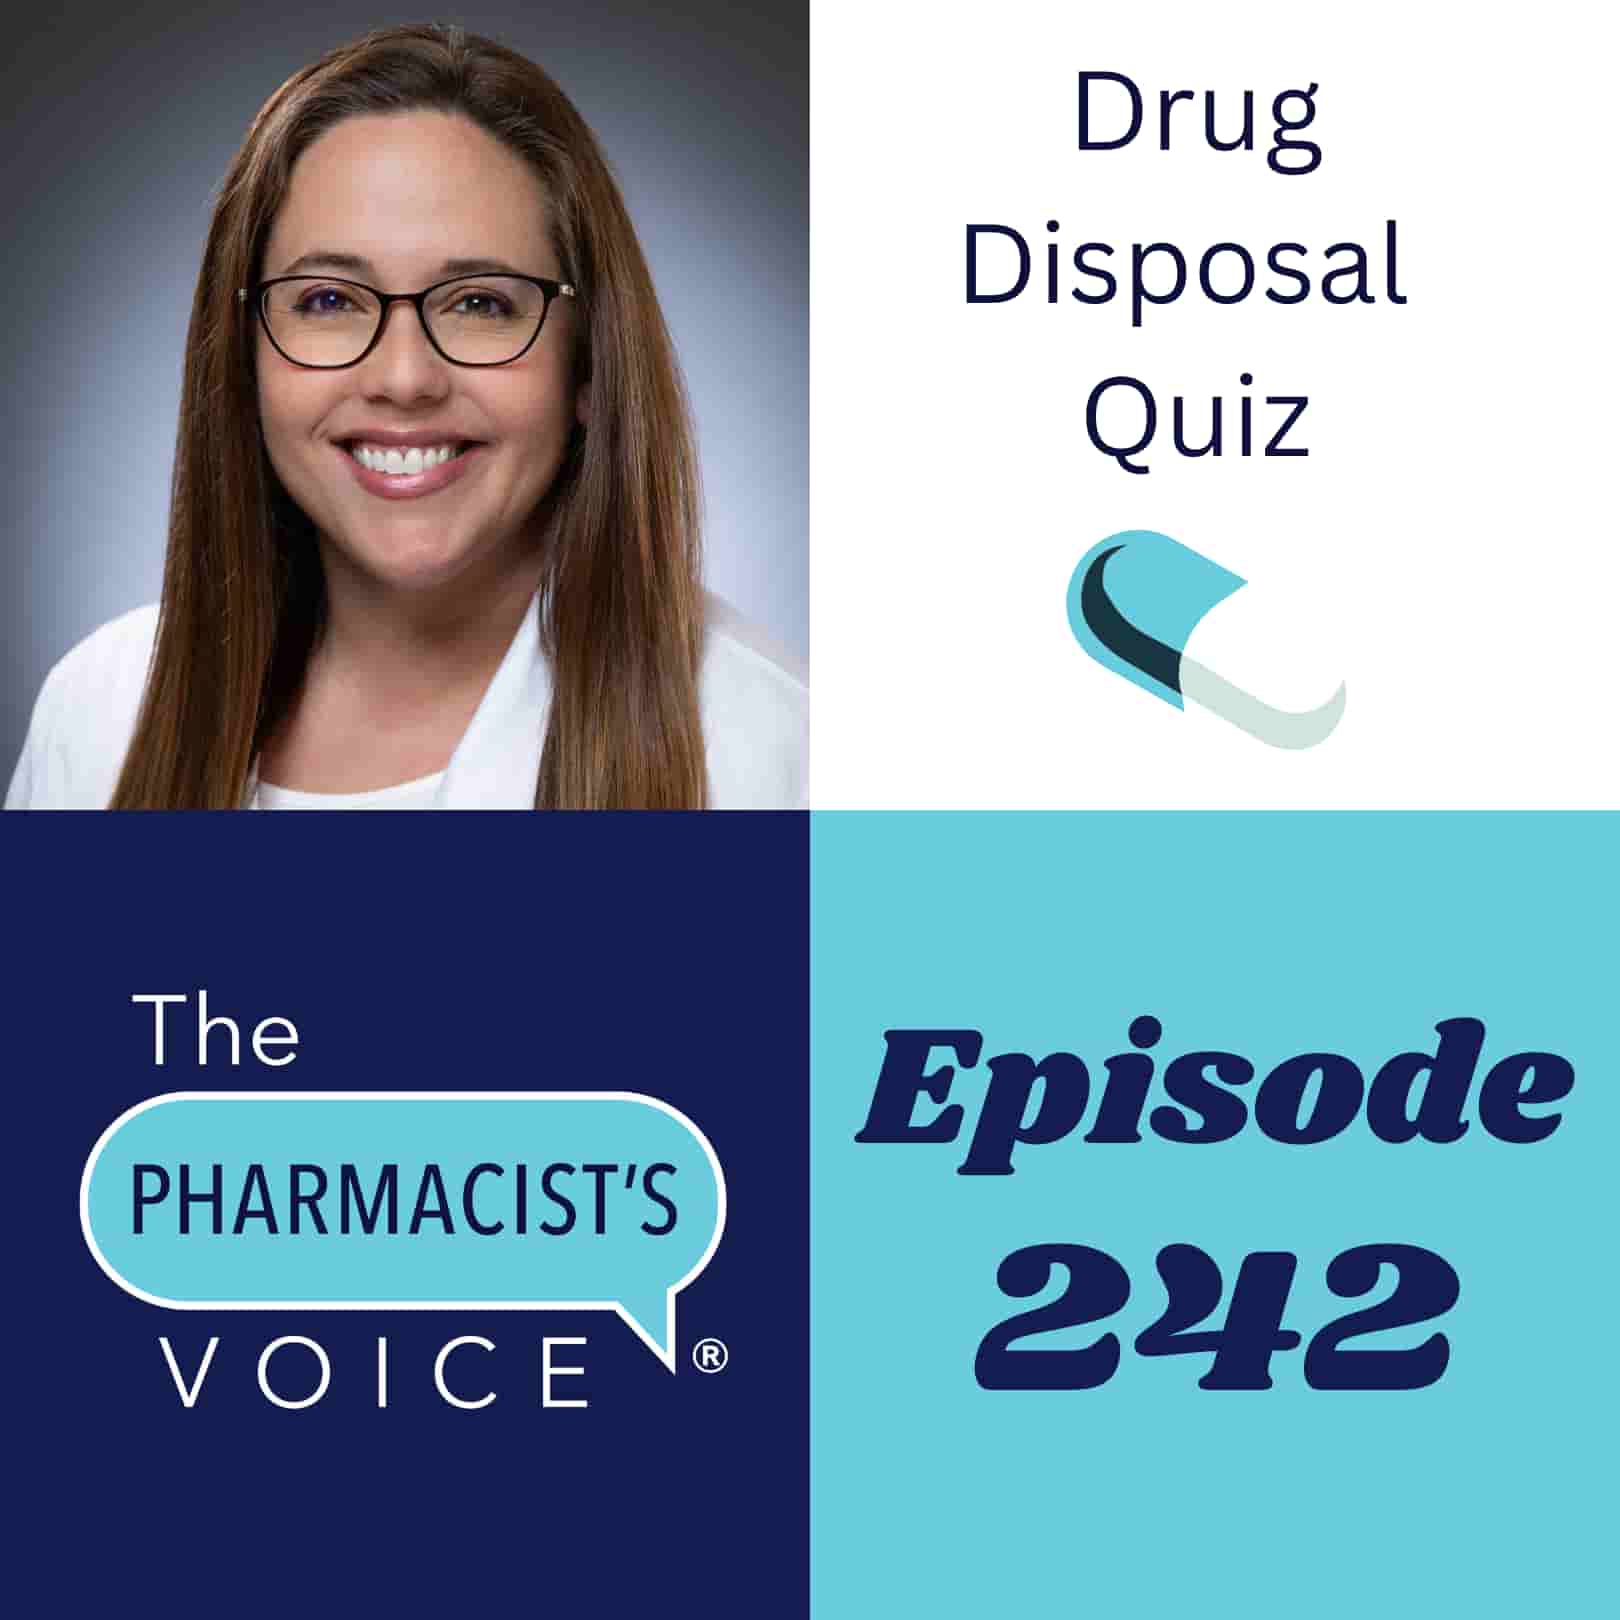 The Pharmacist's Voice Podcast Episode 242. Drug Disposal Quiz. Kim Newlove is the host. She is featured in this podcast artwork. Kim has long, brown hair, brown eyes, and brown glasses. She is wearing a white shirt and a white lab coat. She has fair skin and smiles at the camera.